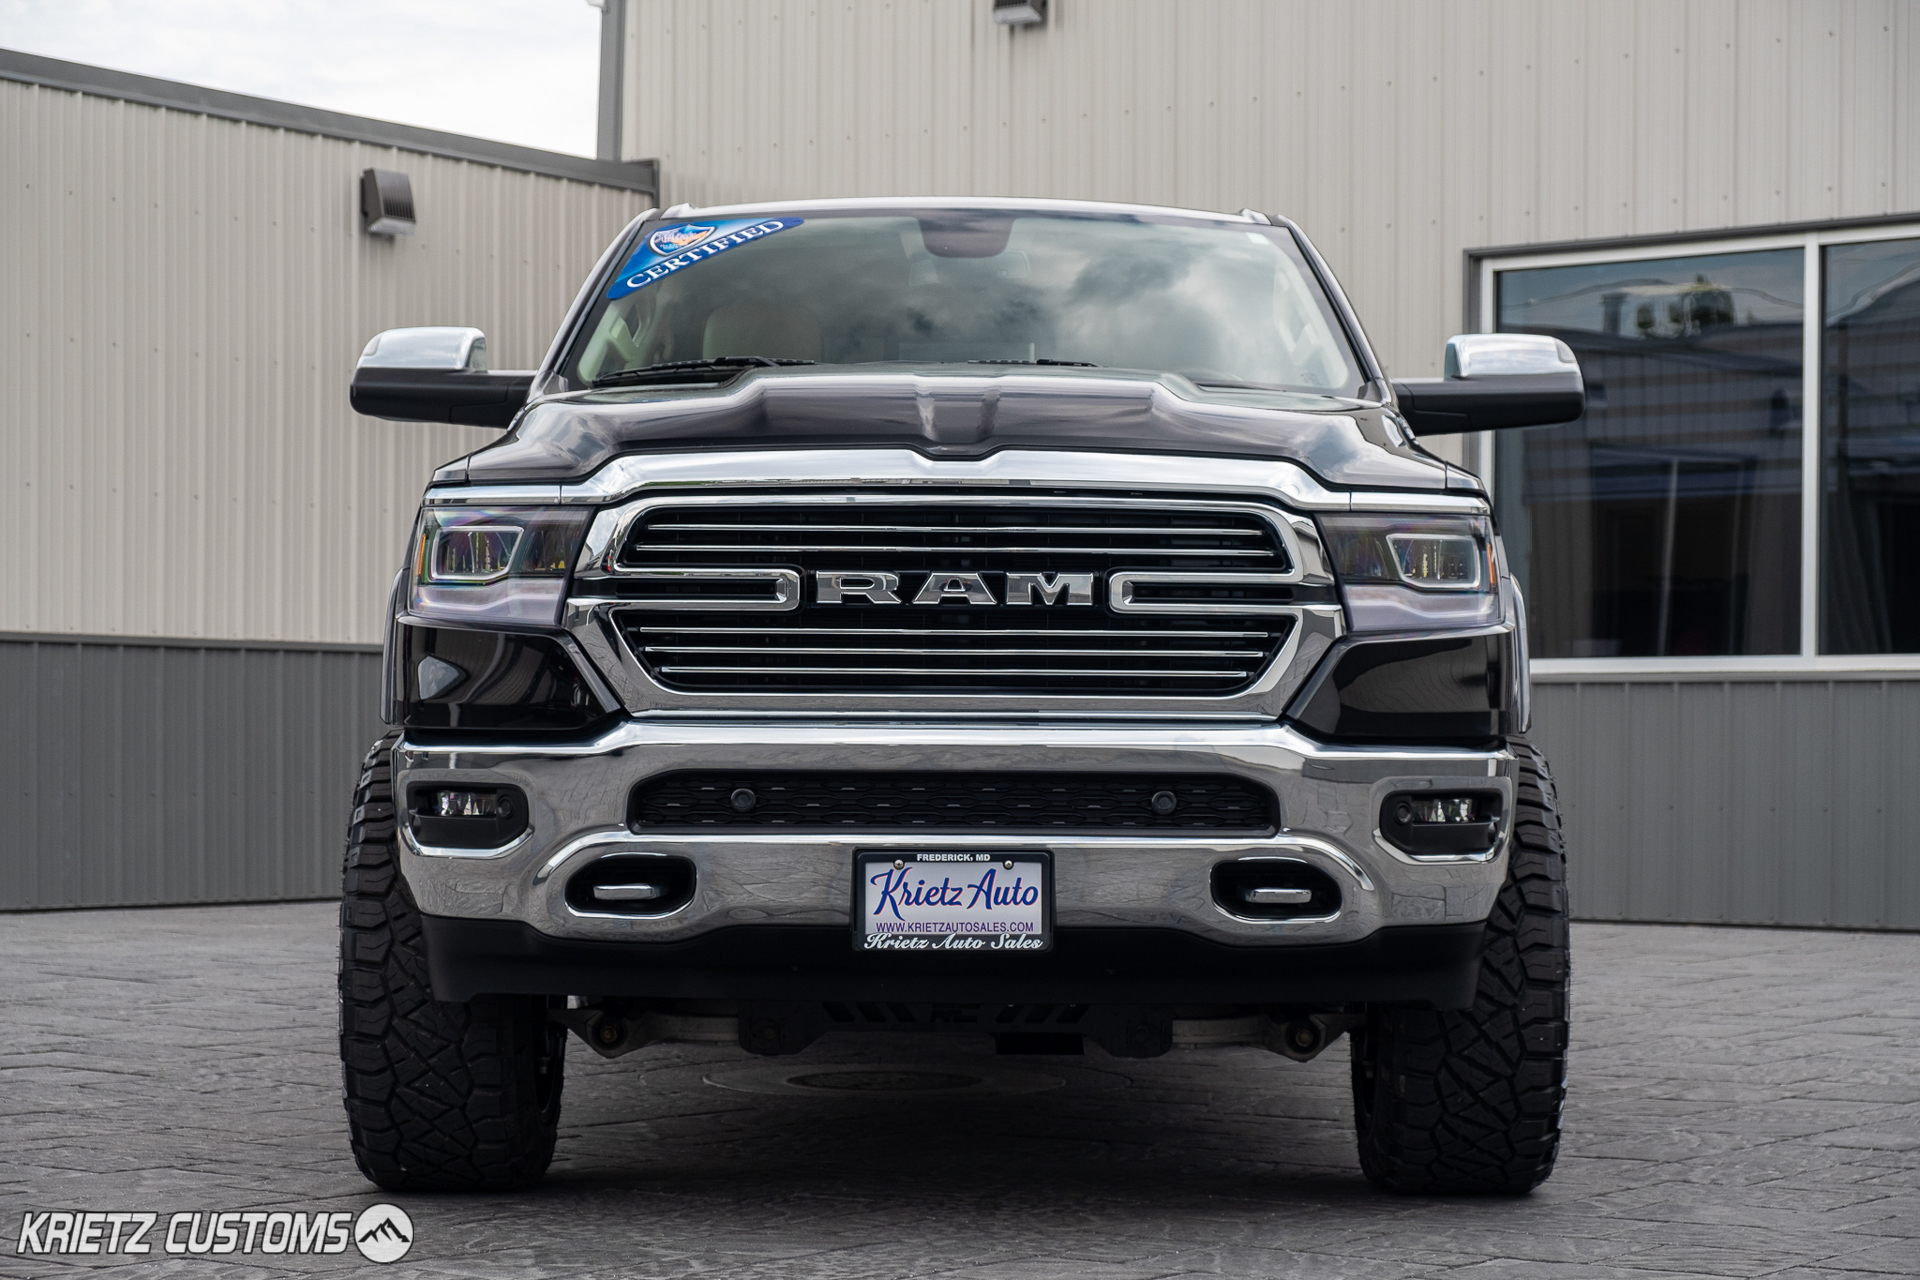 Lifted 2019 Ram 1500 with 22×12 Fuel Vapor Wheels and 6 Inch Rough